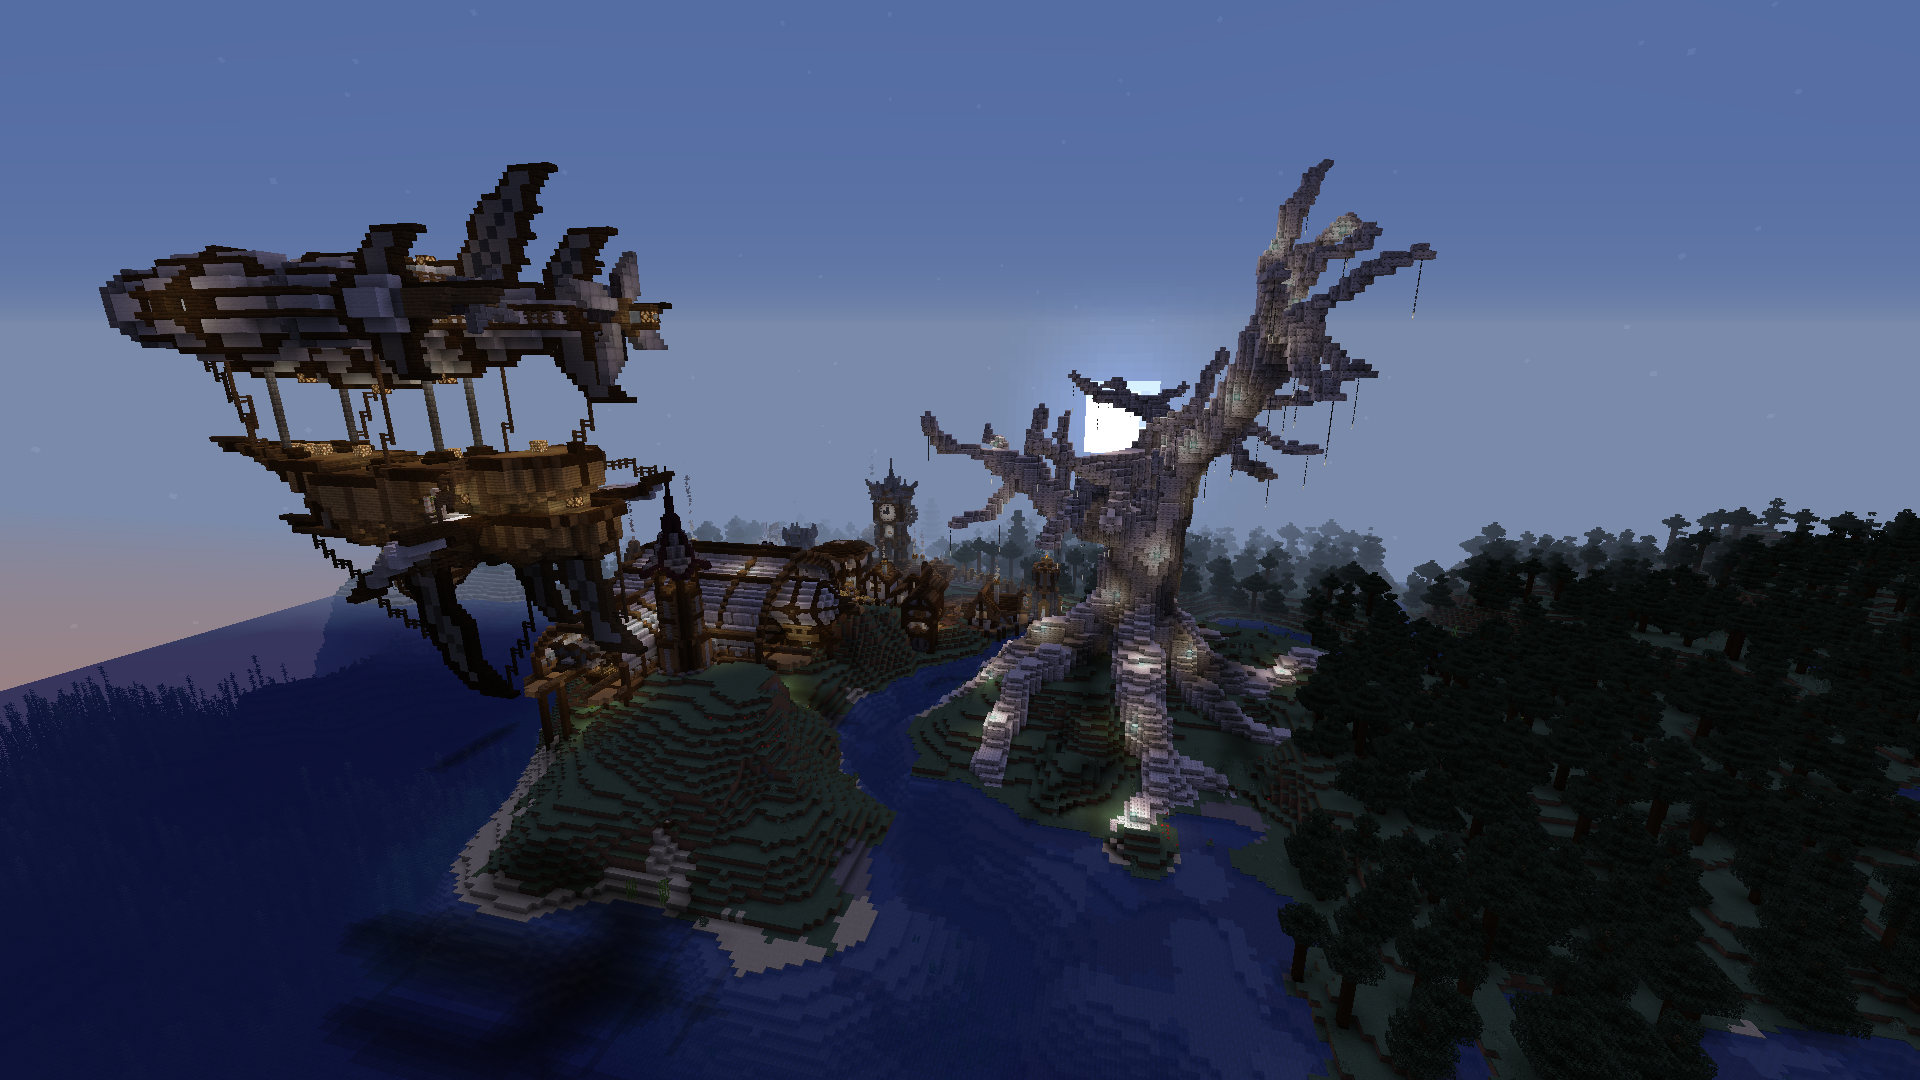 The shattered moon in a silver tree with a Telperion Skyship in the foreground.